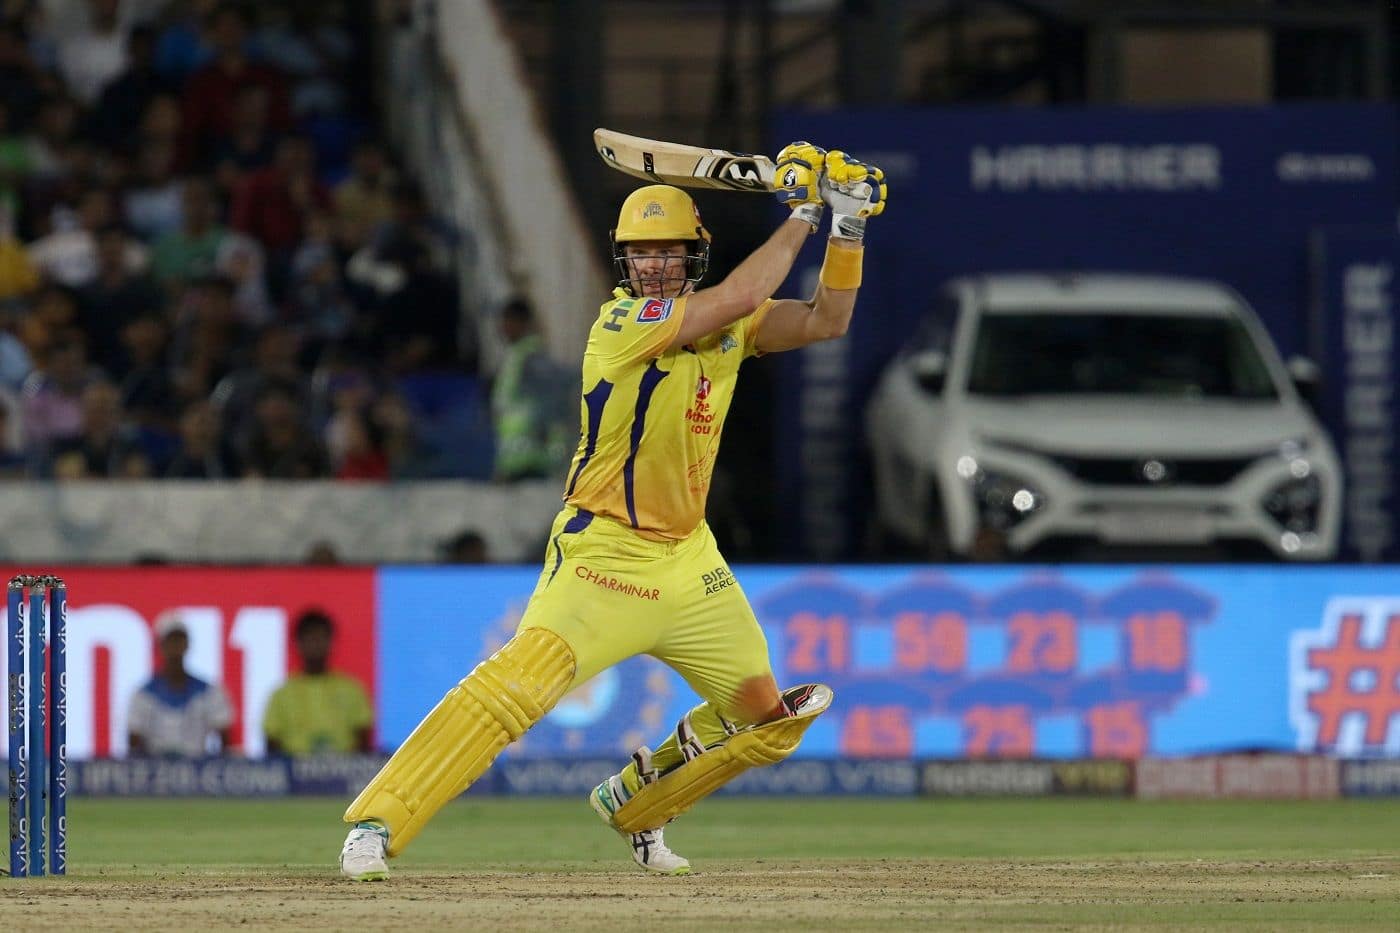 IPL 2019 final: Shane Watson batted with a bleeding leg to take CSK to the doorstep of victory